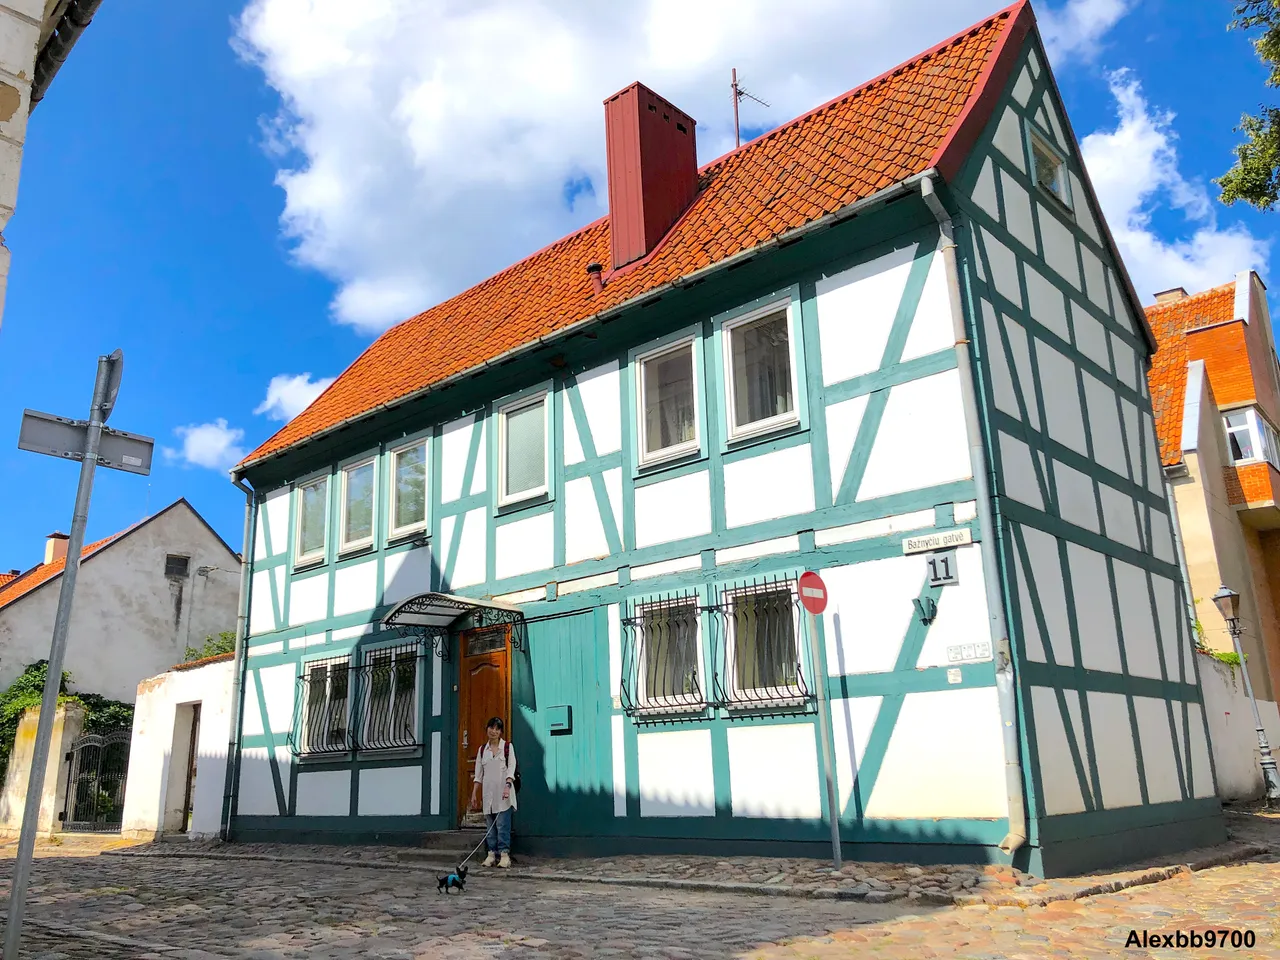 The german house in Klaipeda Old Town